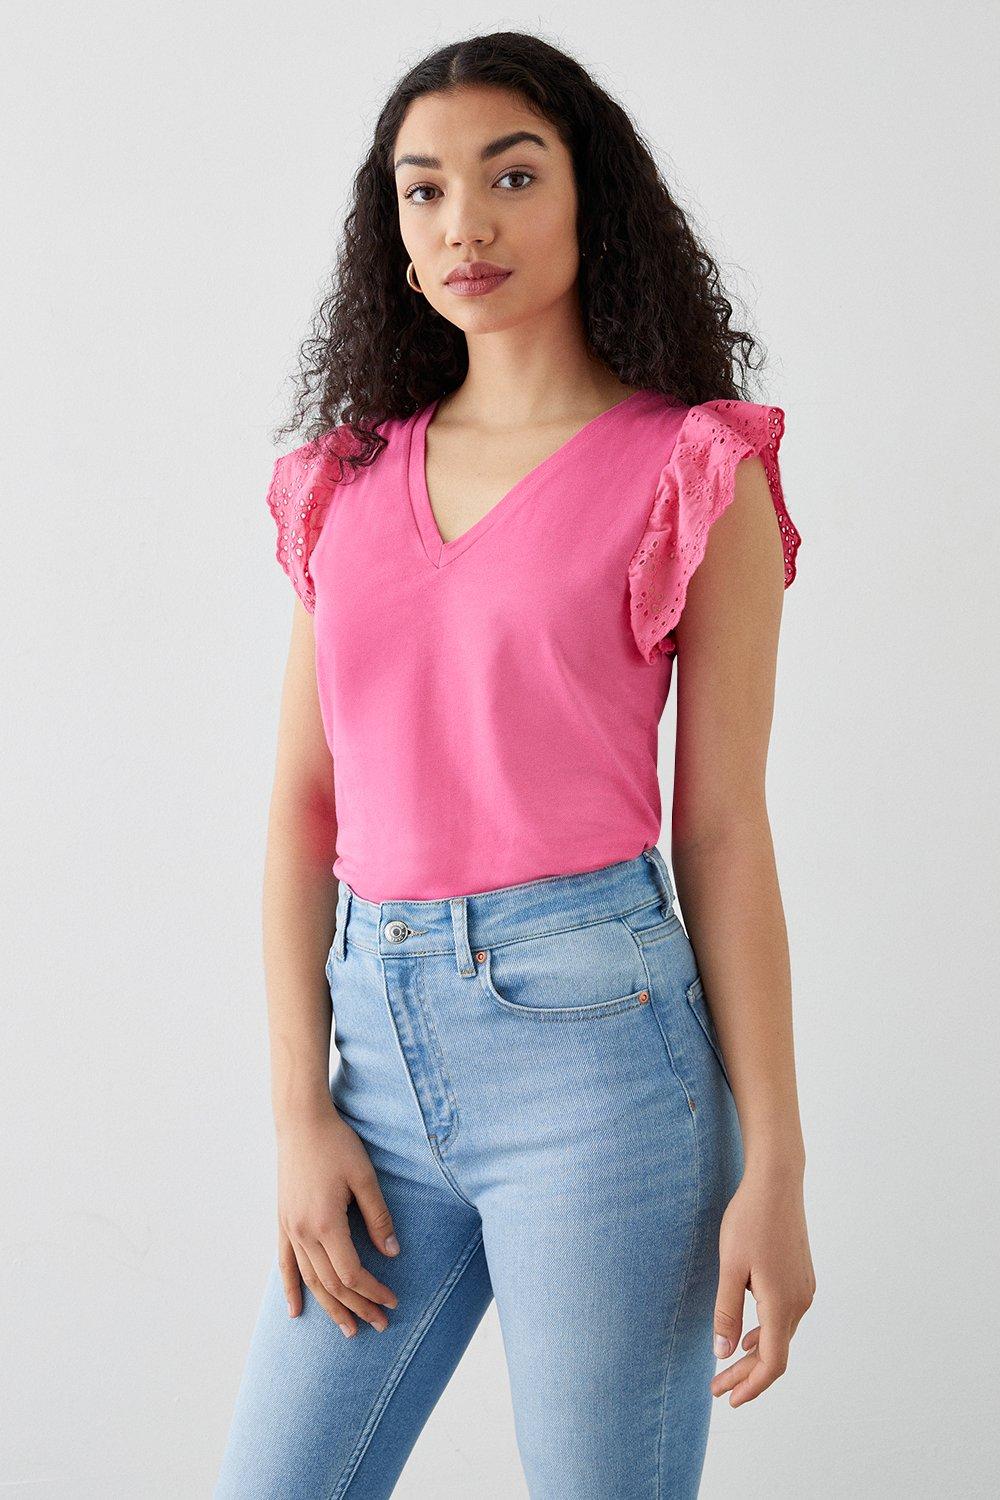 Women’s V Neck Frill Sleeve Top - pink - S